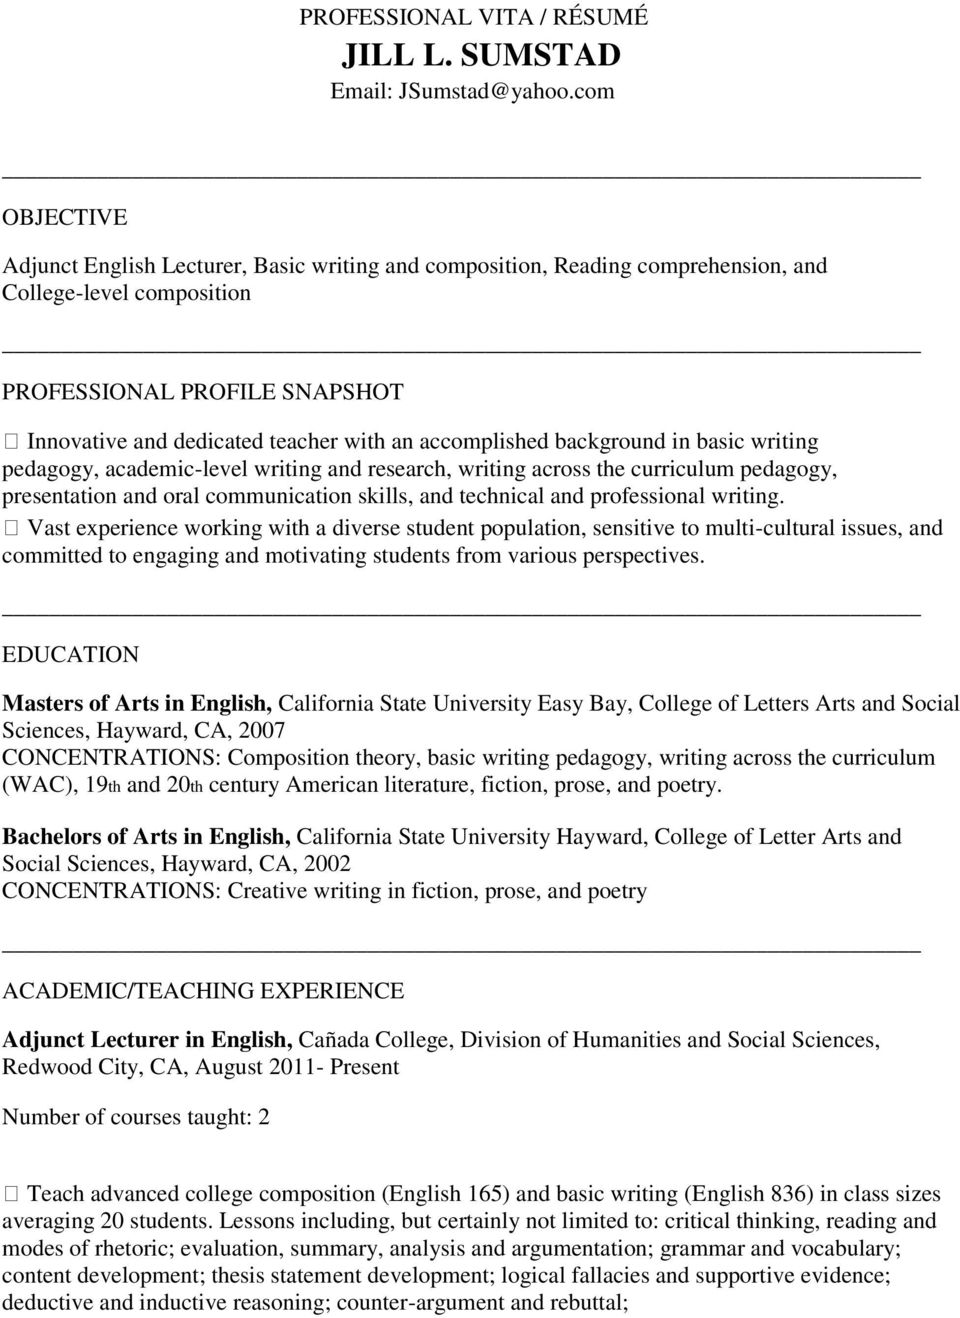 accomplished background in basic writing pedagogy, academic-level writing and research, writing across the curriculum pedagogy, presentation and oral communication skills, and technical and